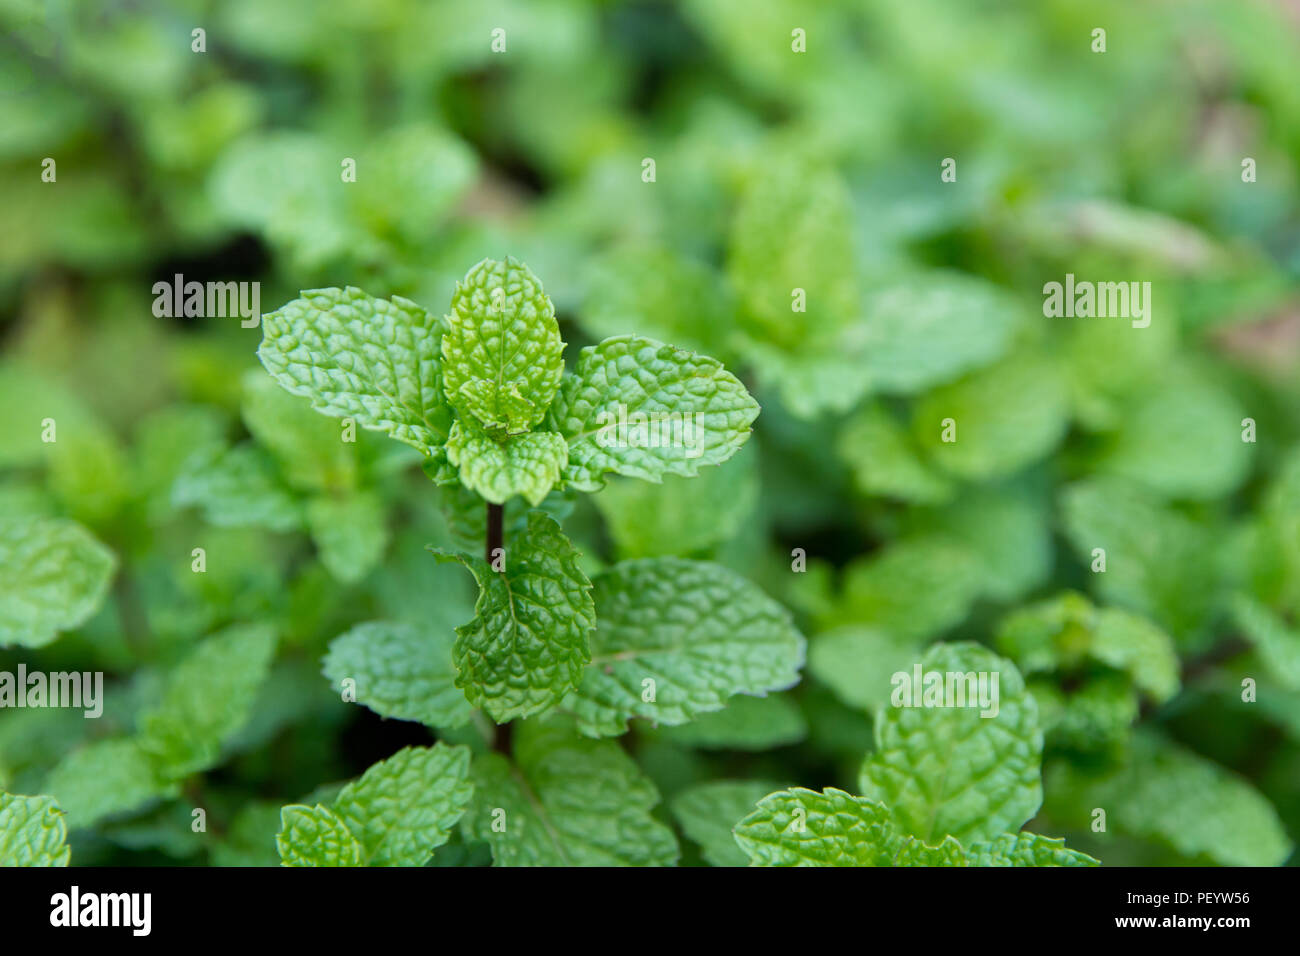 Green peppermint leaves background. fresh peppermint growing in the garden Stock Photo